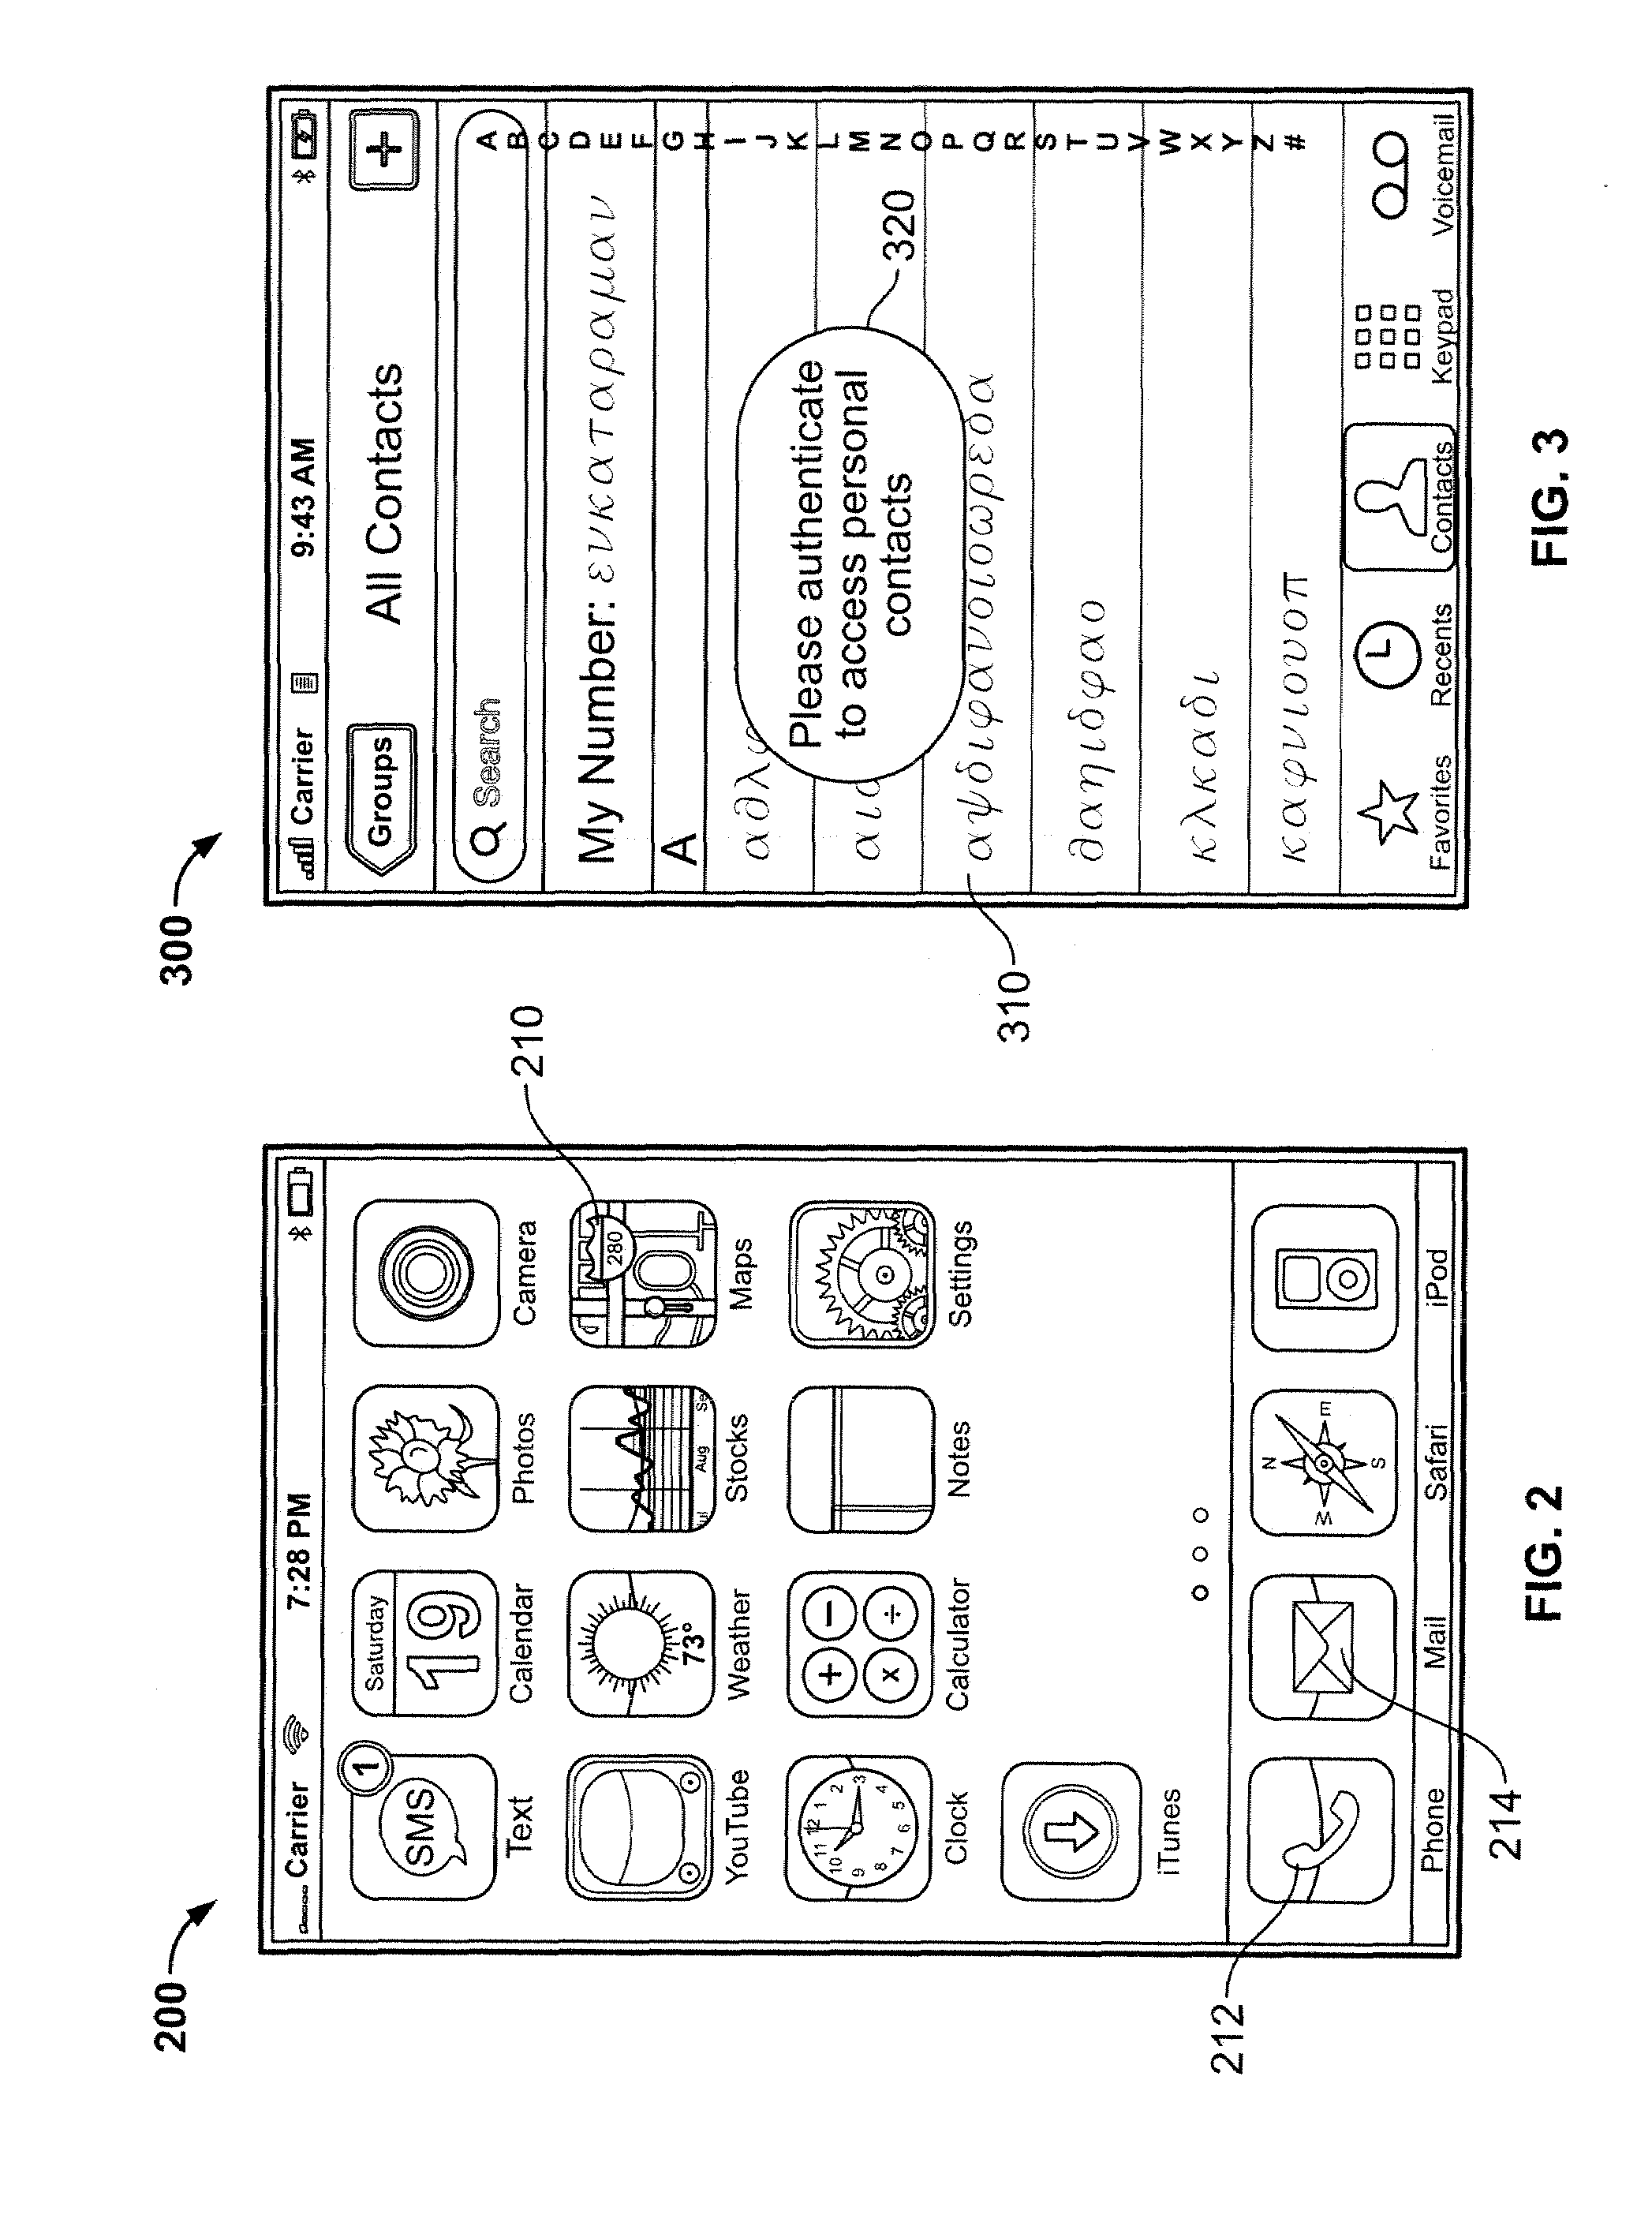 Embedded authentication systems in an electronic device